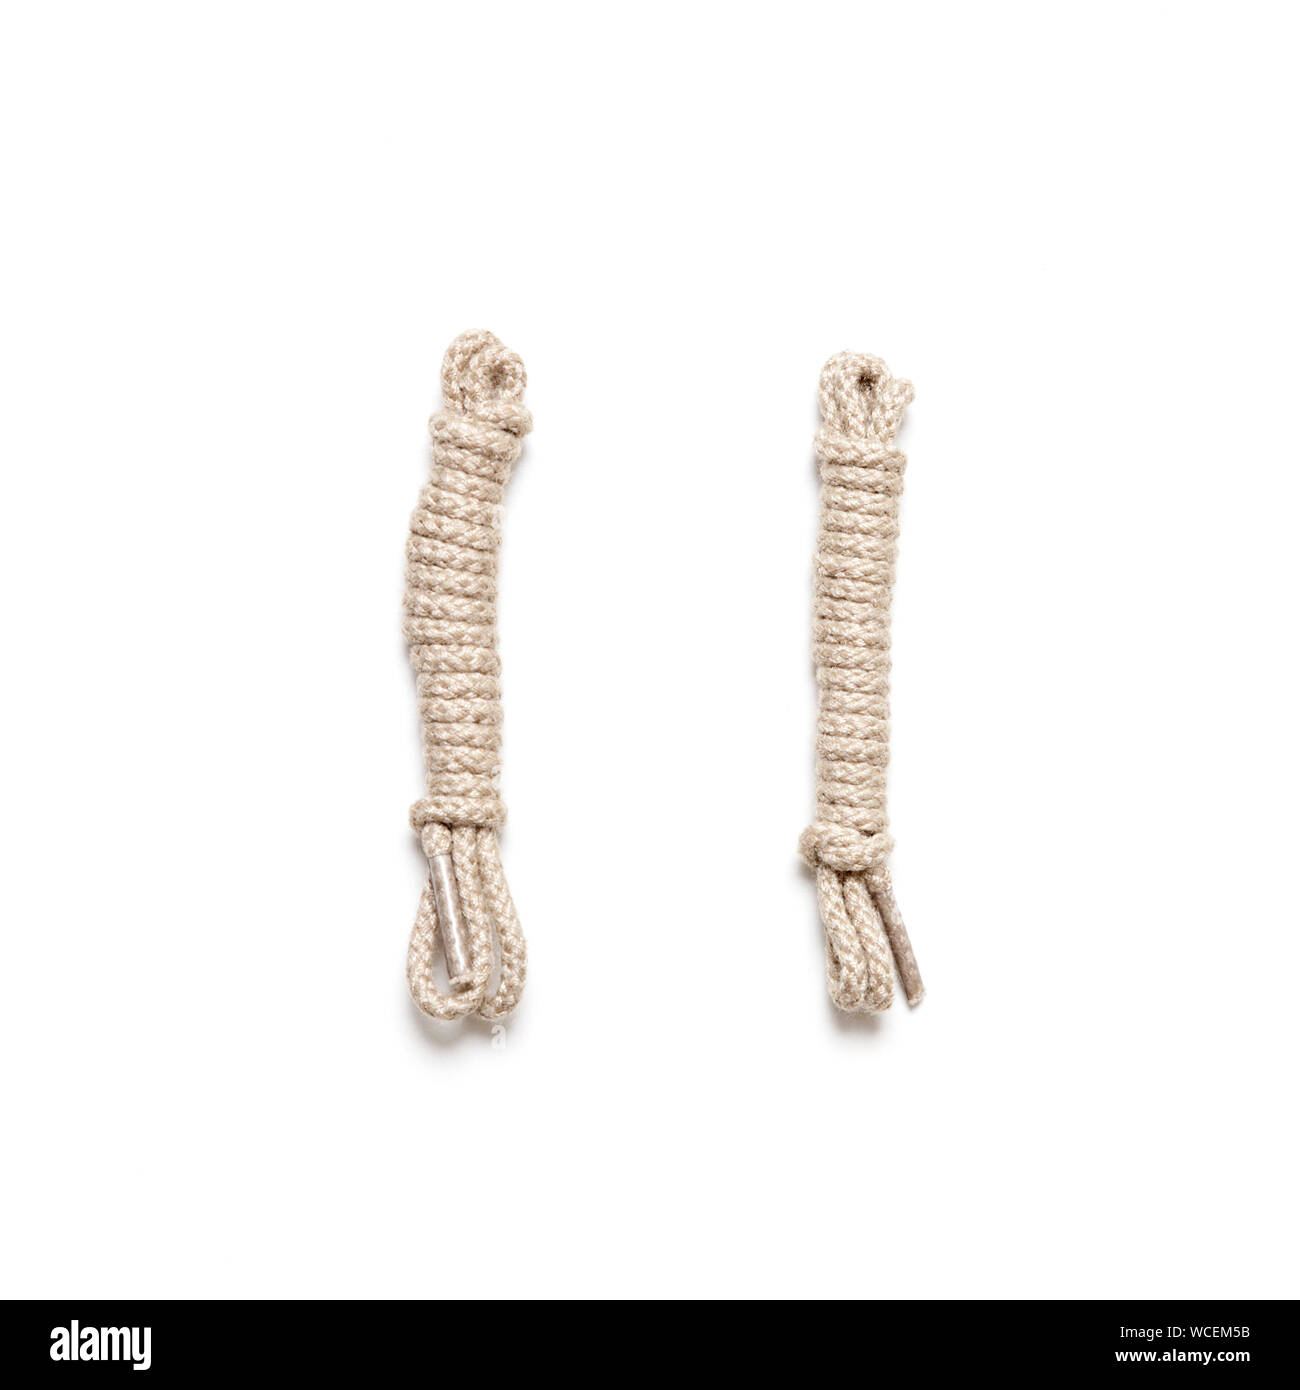 Pair of new shoe laces isolated on a white background Stock Photo